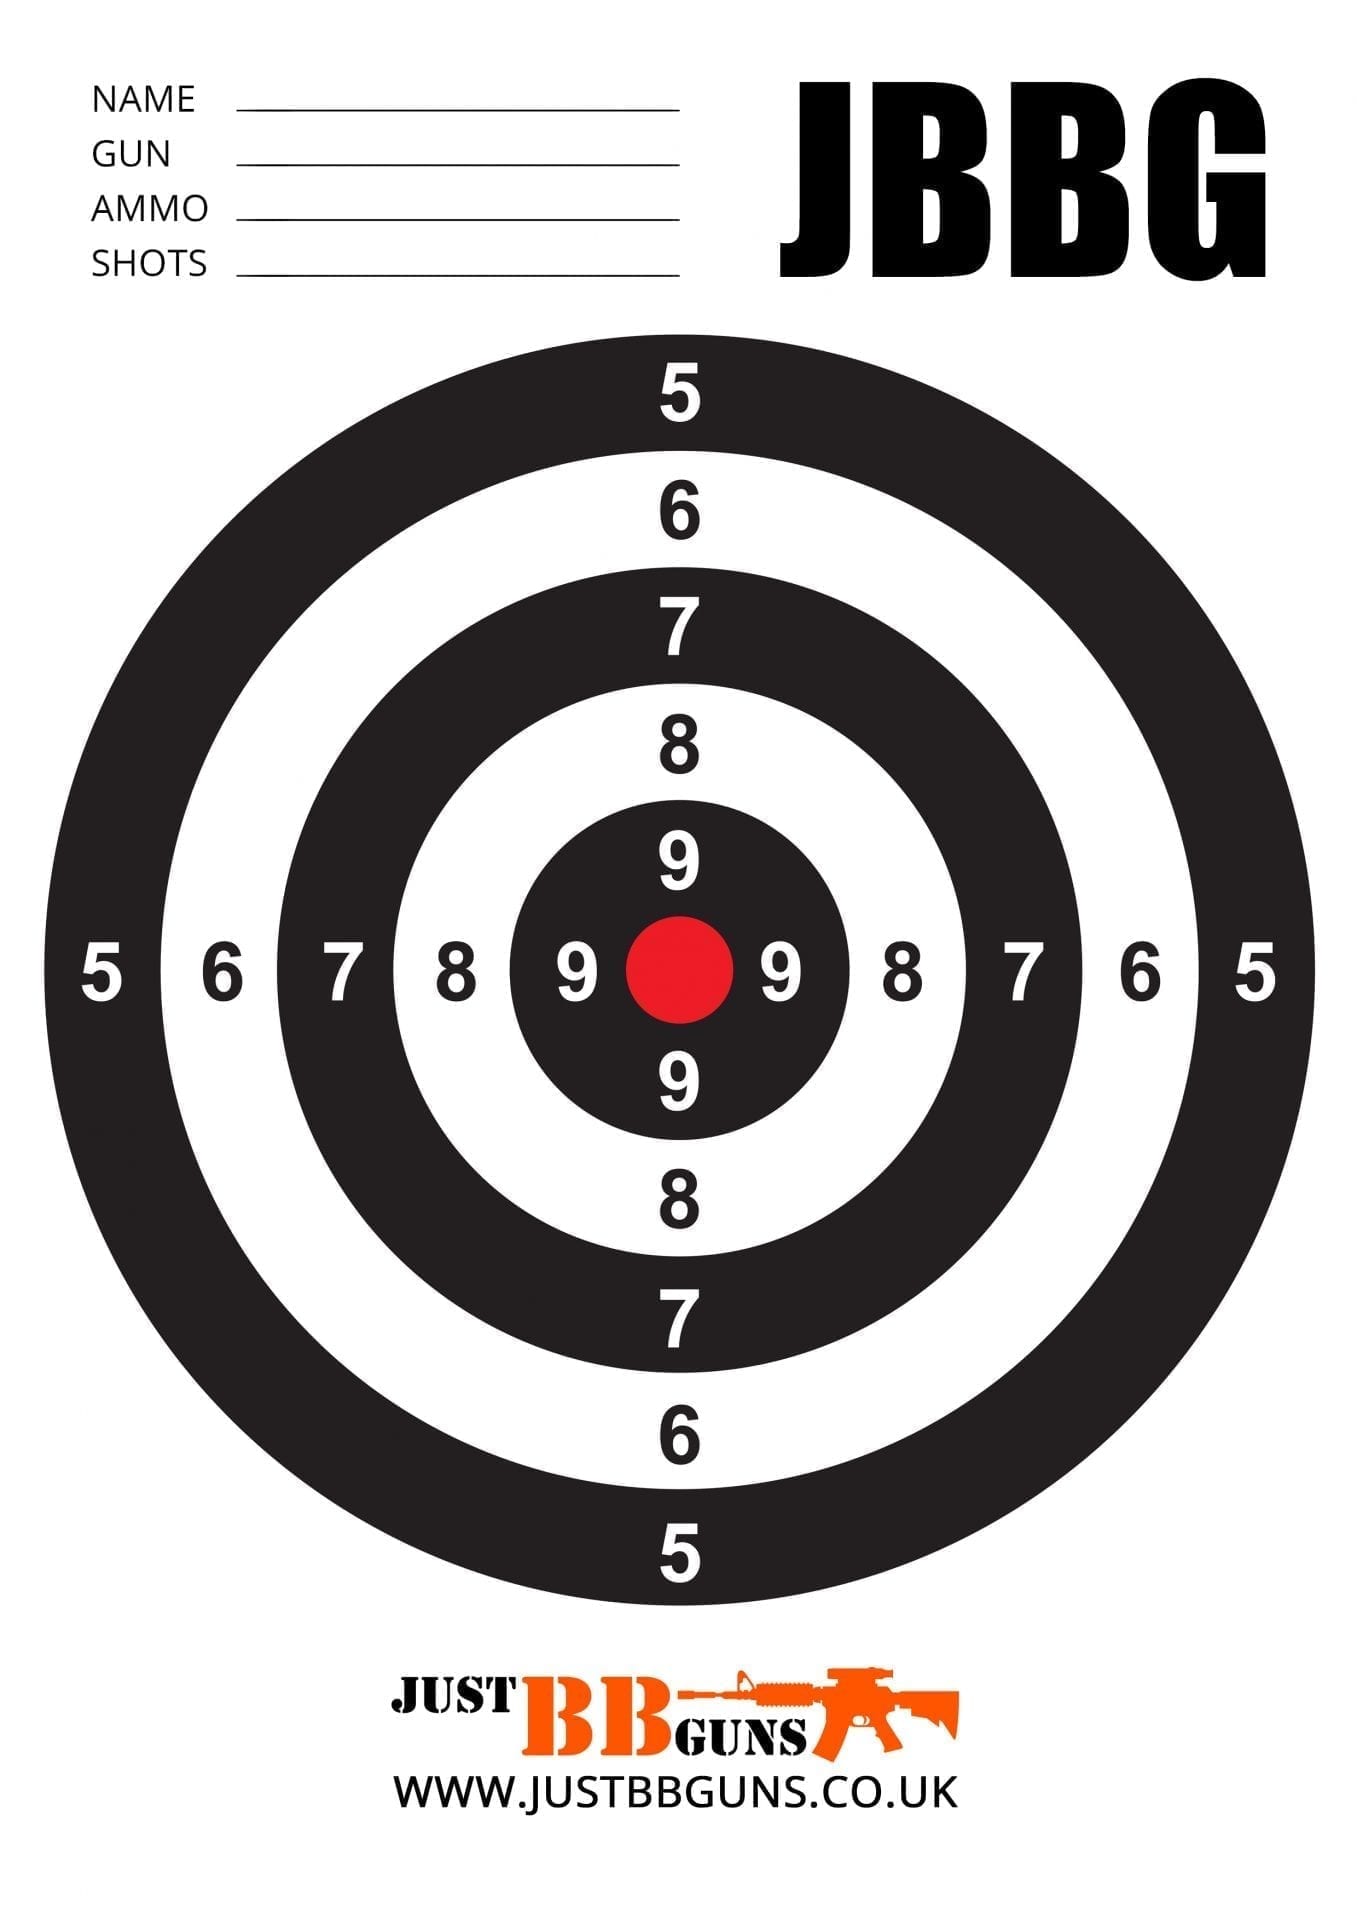 Free Targets Just BB Guns, Airsoft Targets to Download and Print